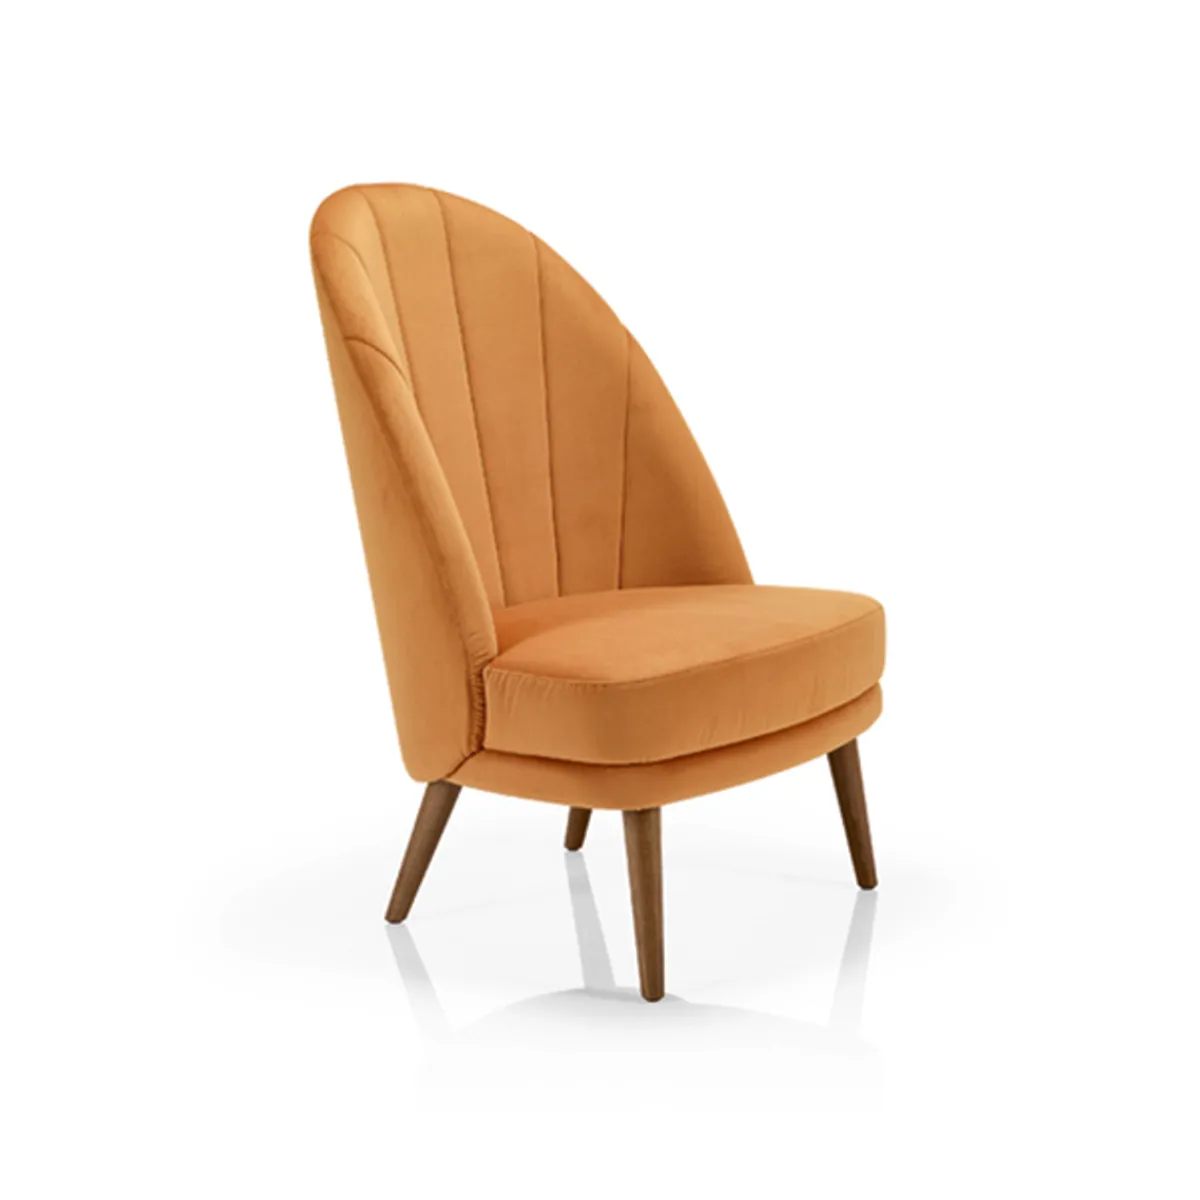 Del Rey Lounge Chair Wirh Fluted Upholstery Inside Out Contracts